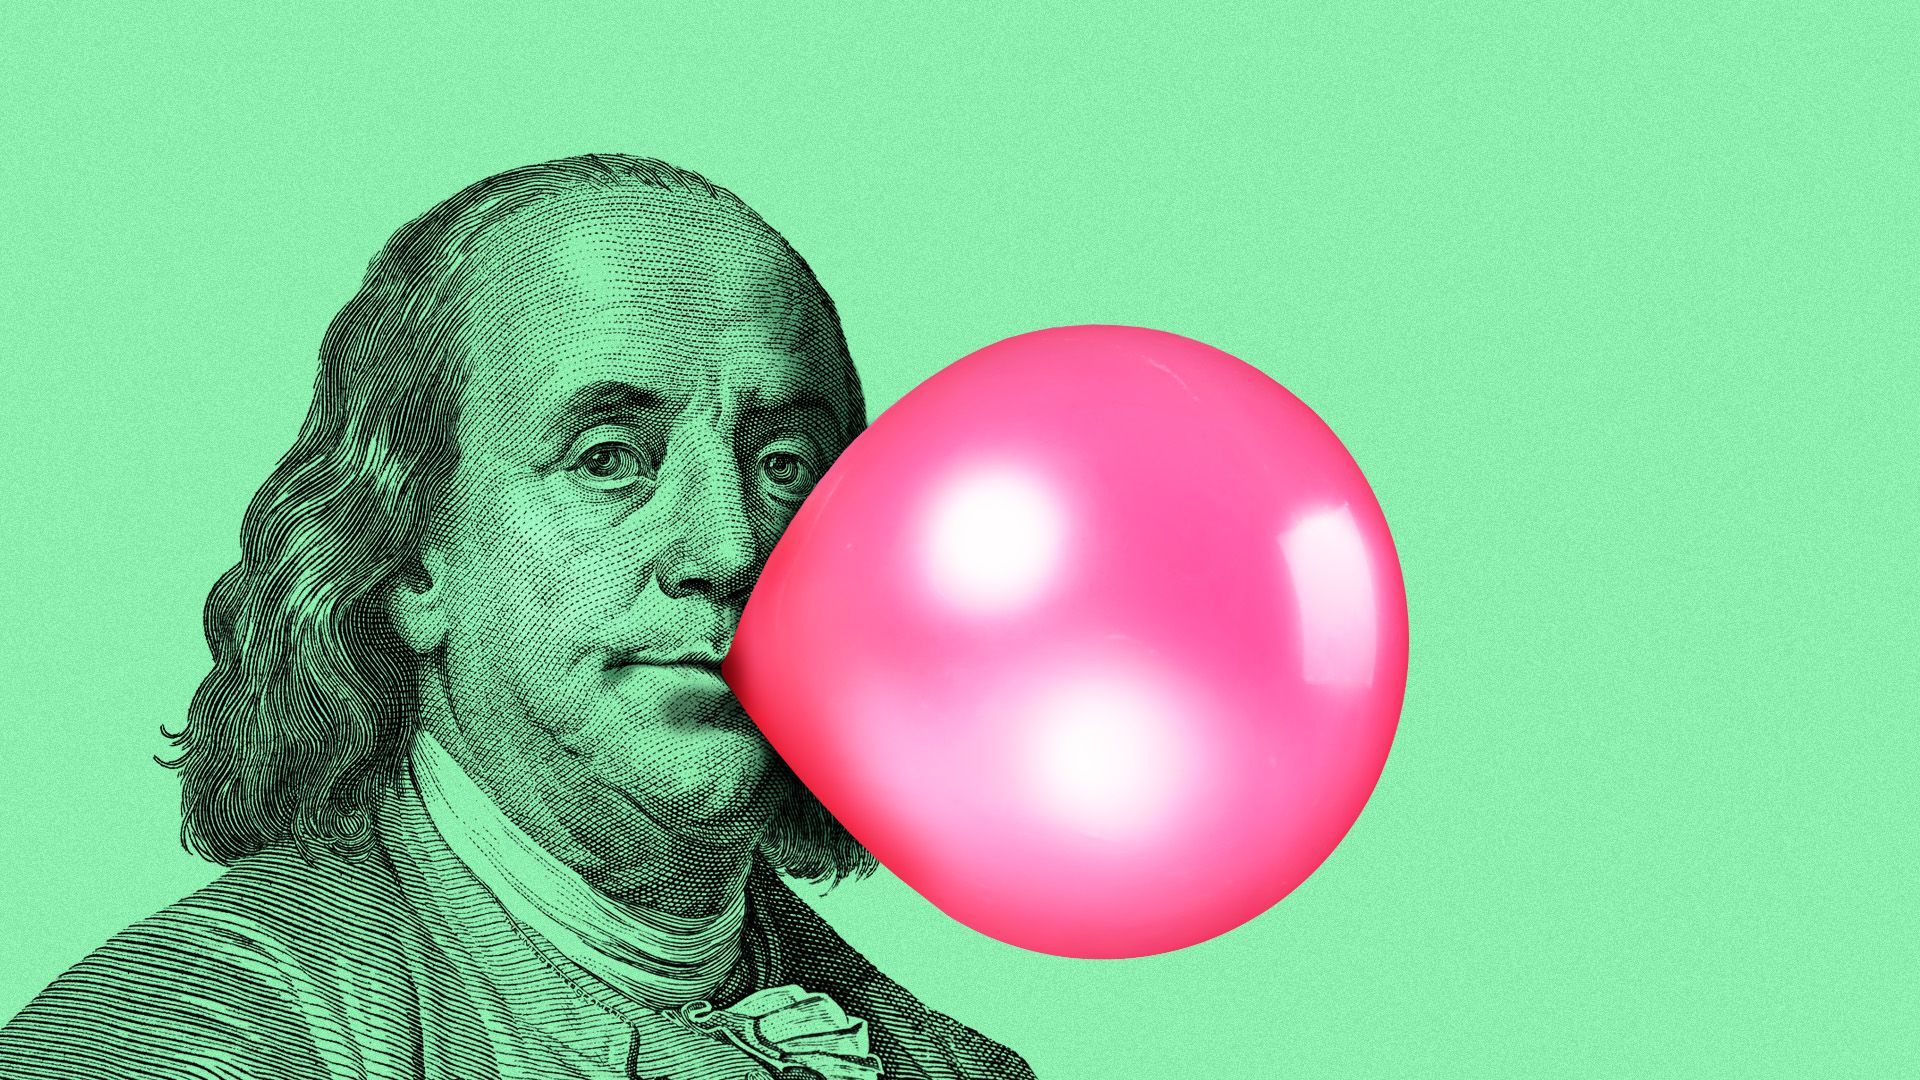 Illustration of Benjamin Franklin from a $100 dollar bill blowing a chewing gum bubble